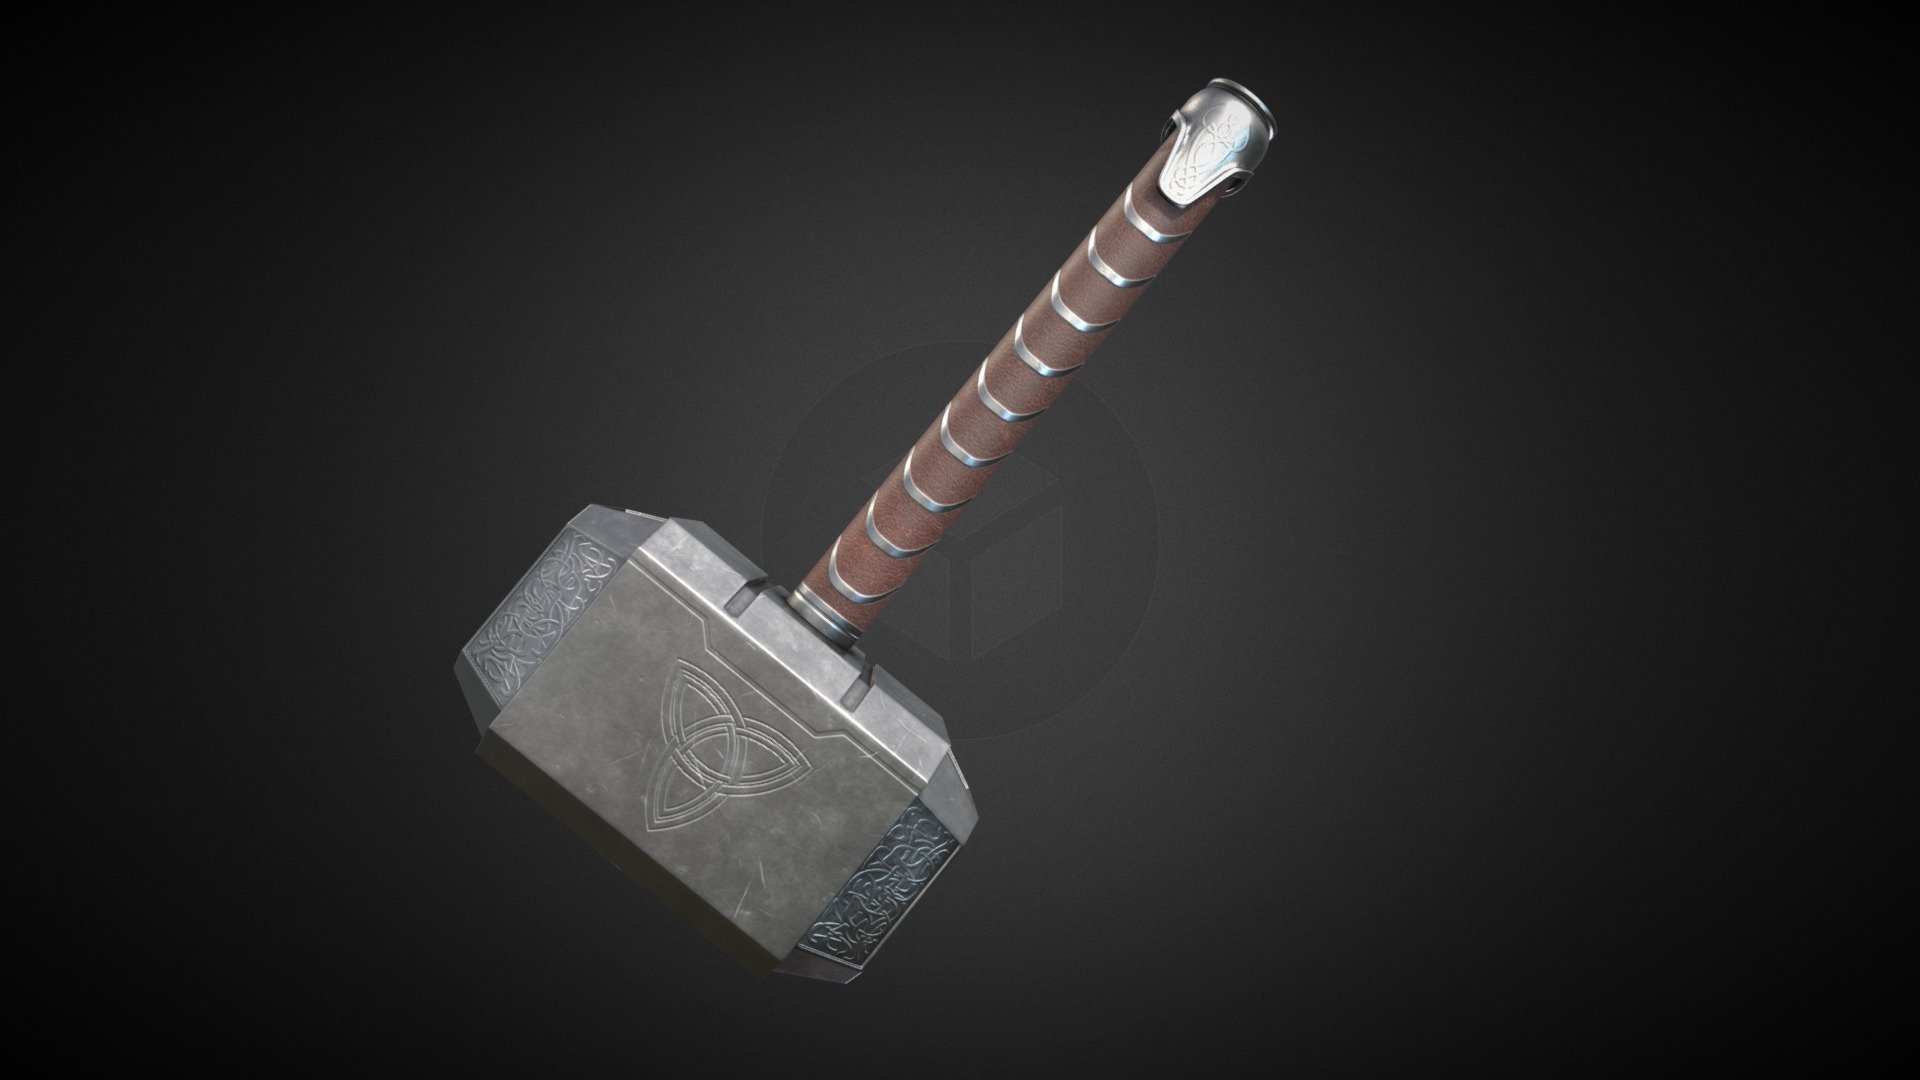 3D model of Mjolnir, Thor's hammer. Contains 4k textures in .jpg format.

Download size: 18 MB

Modeled &amp; textured in Blender 2.91.

If you plan to use it somewhere please credit the author, that's all I ask 3d model